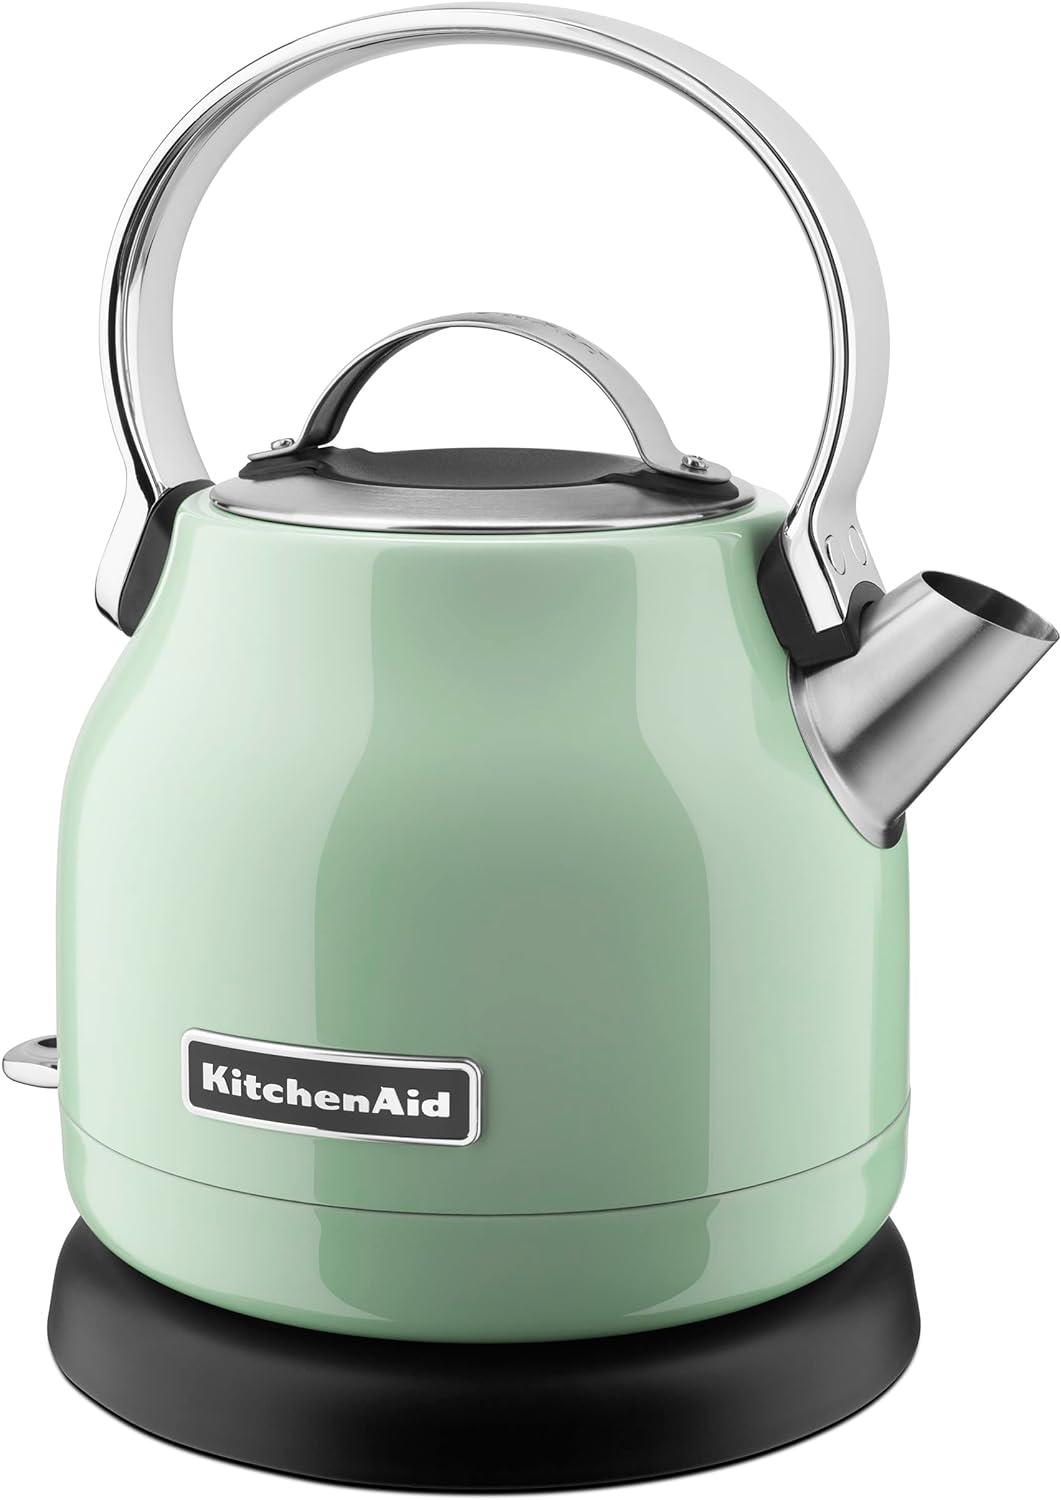 a mint green kitchen aid electric kettle